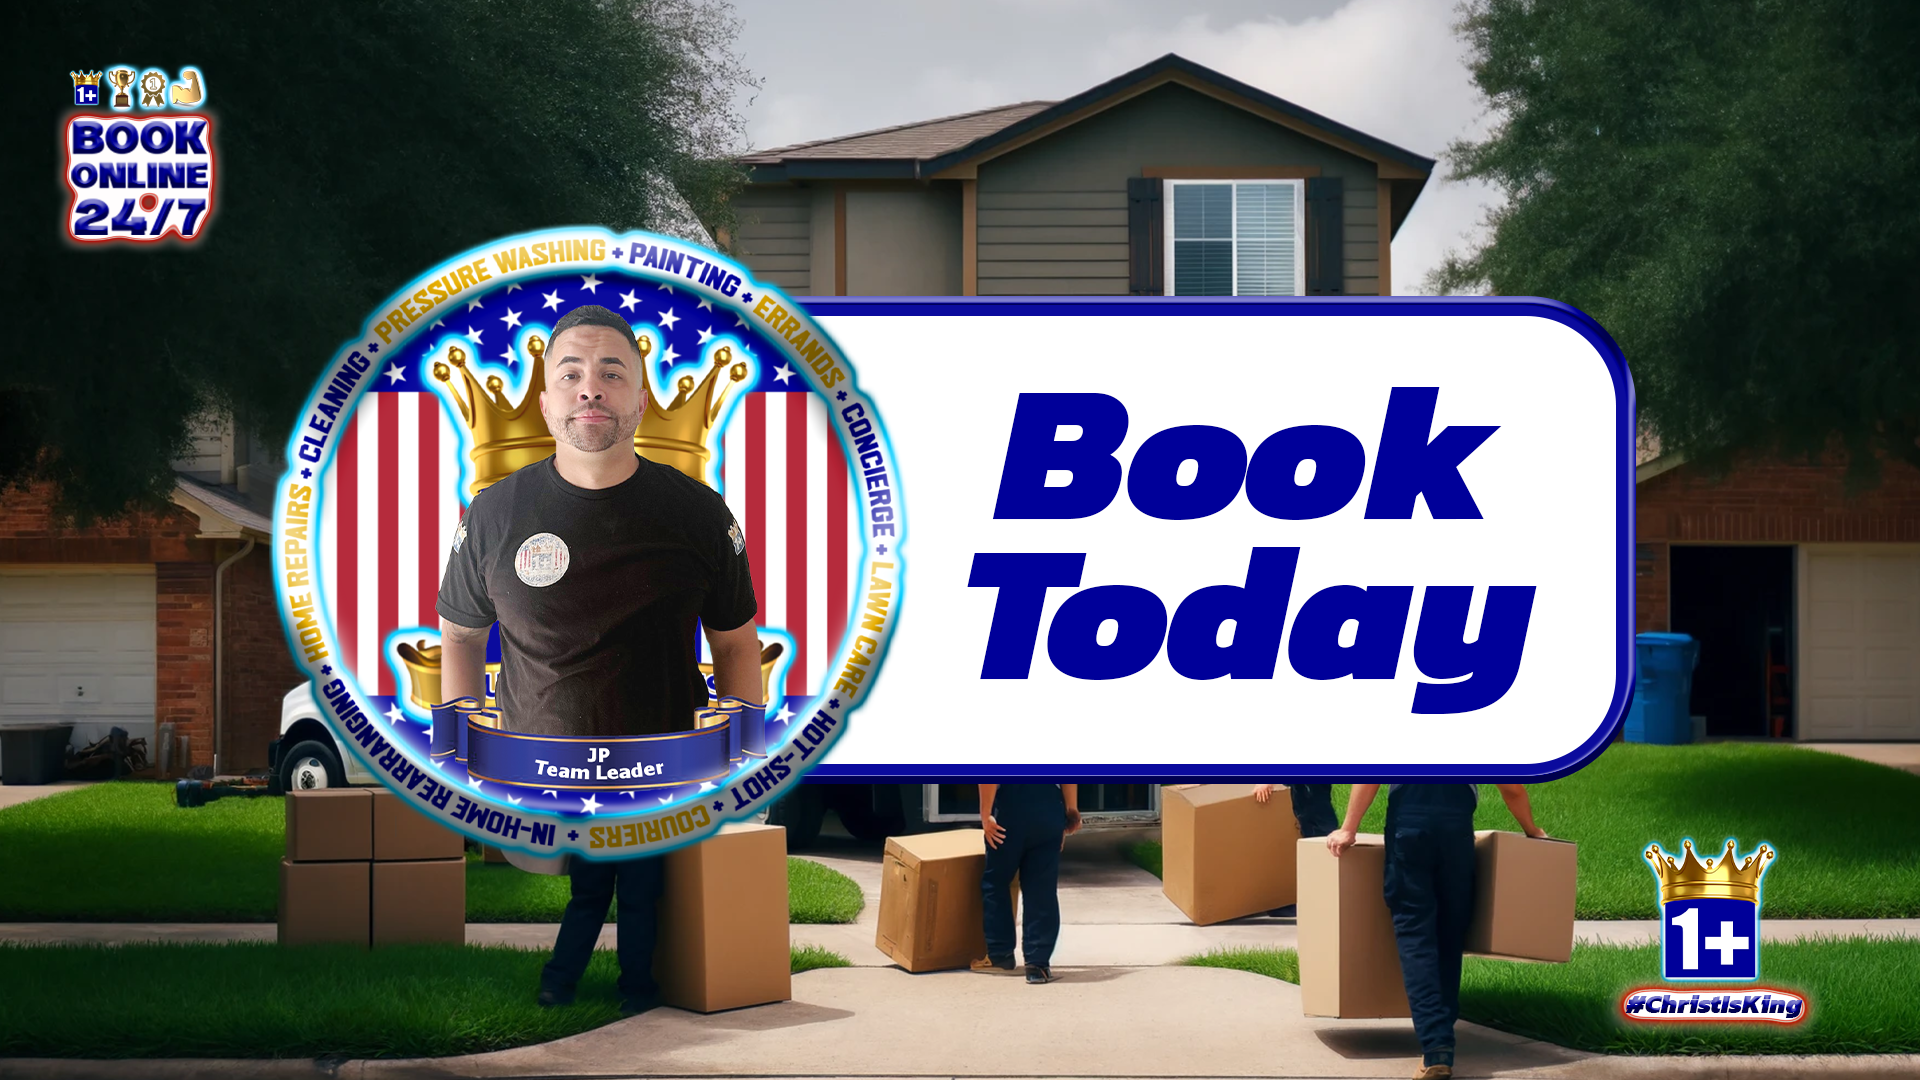 Jp Team Leader Expert Mover; Seabrook, Tx; Kemah, Texas Invites You To Book Today